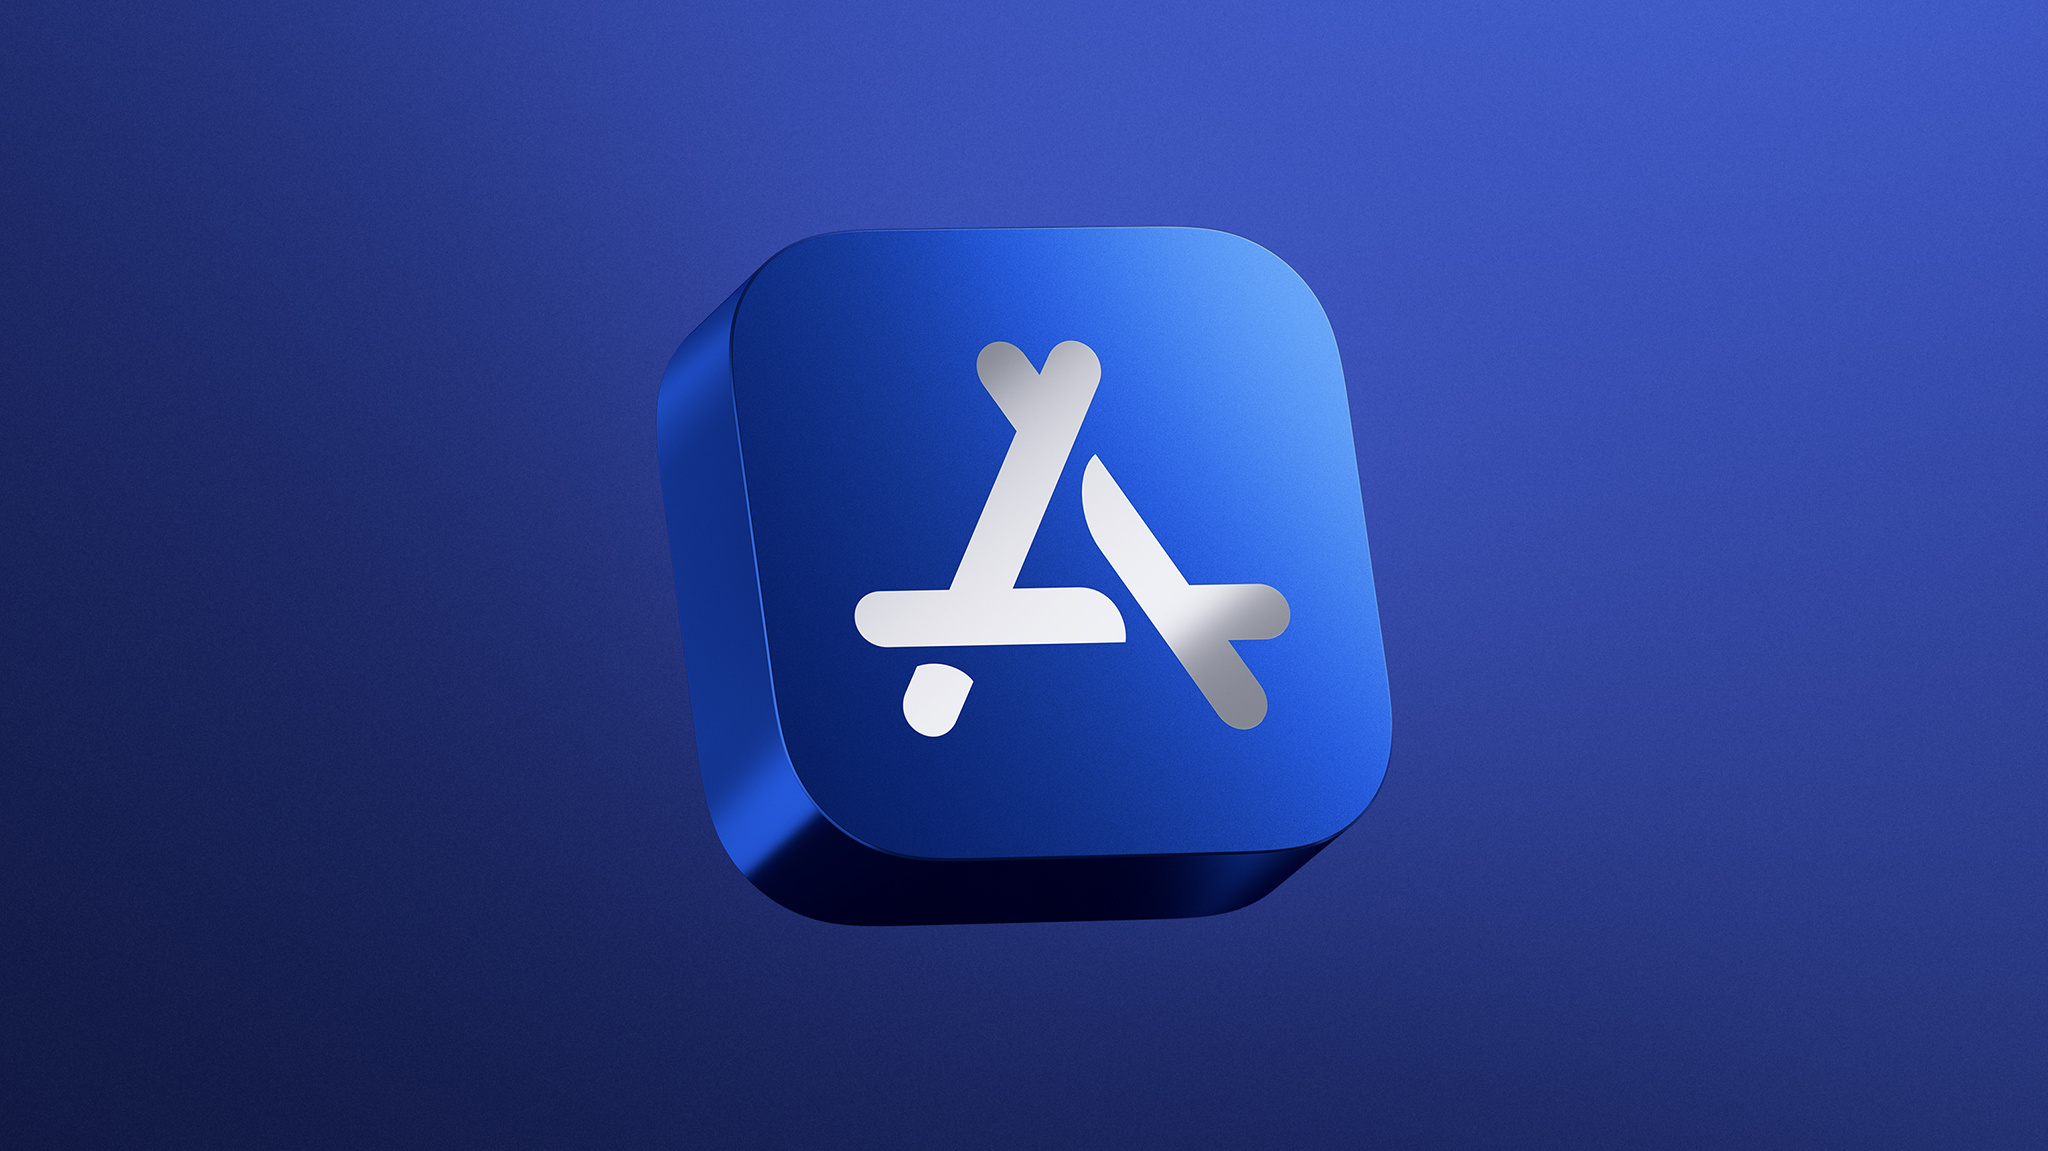 The App Store Awards icon